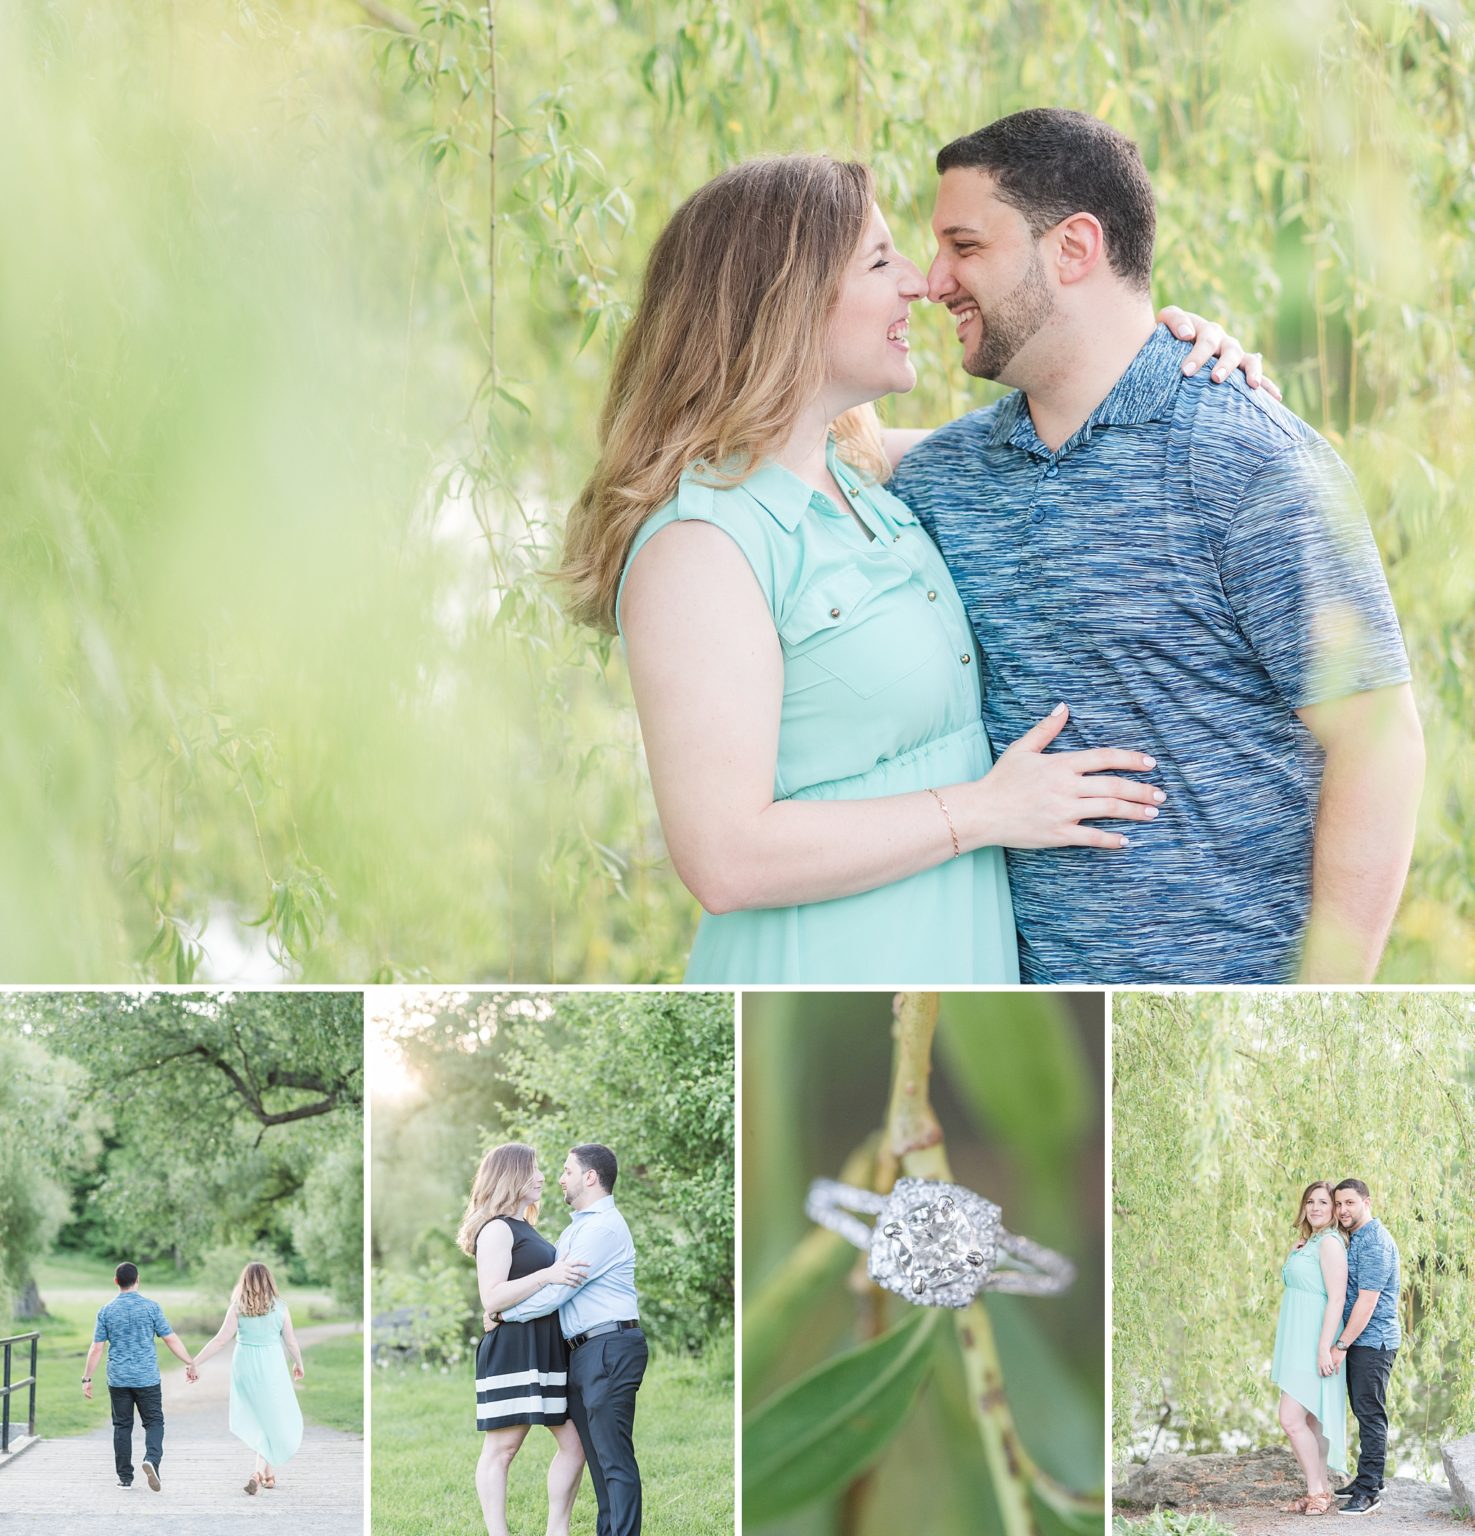 Spring Experimental Farm Engagement | Ottawa Engagement | Engagement photos at Dominion Arboretum at the Central Experimental Farm Get more inspiration from this fun springtime engagement session. #ottawawedding #weddingphotography #ottawaweddings